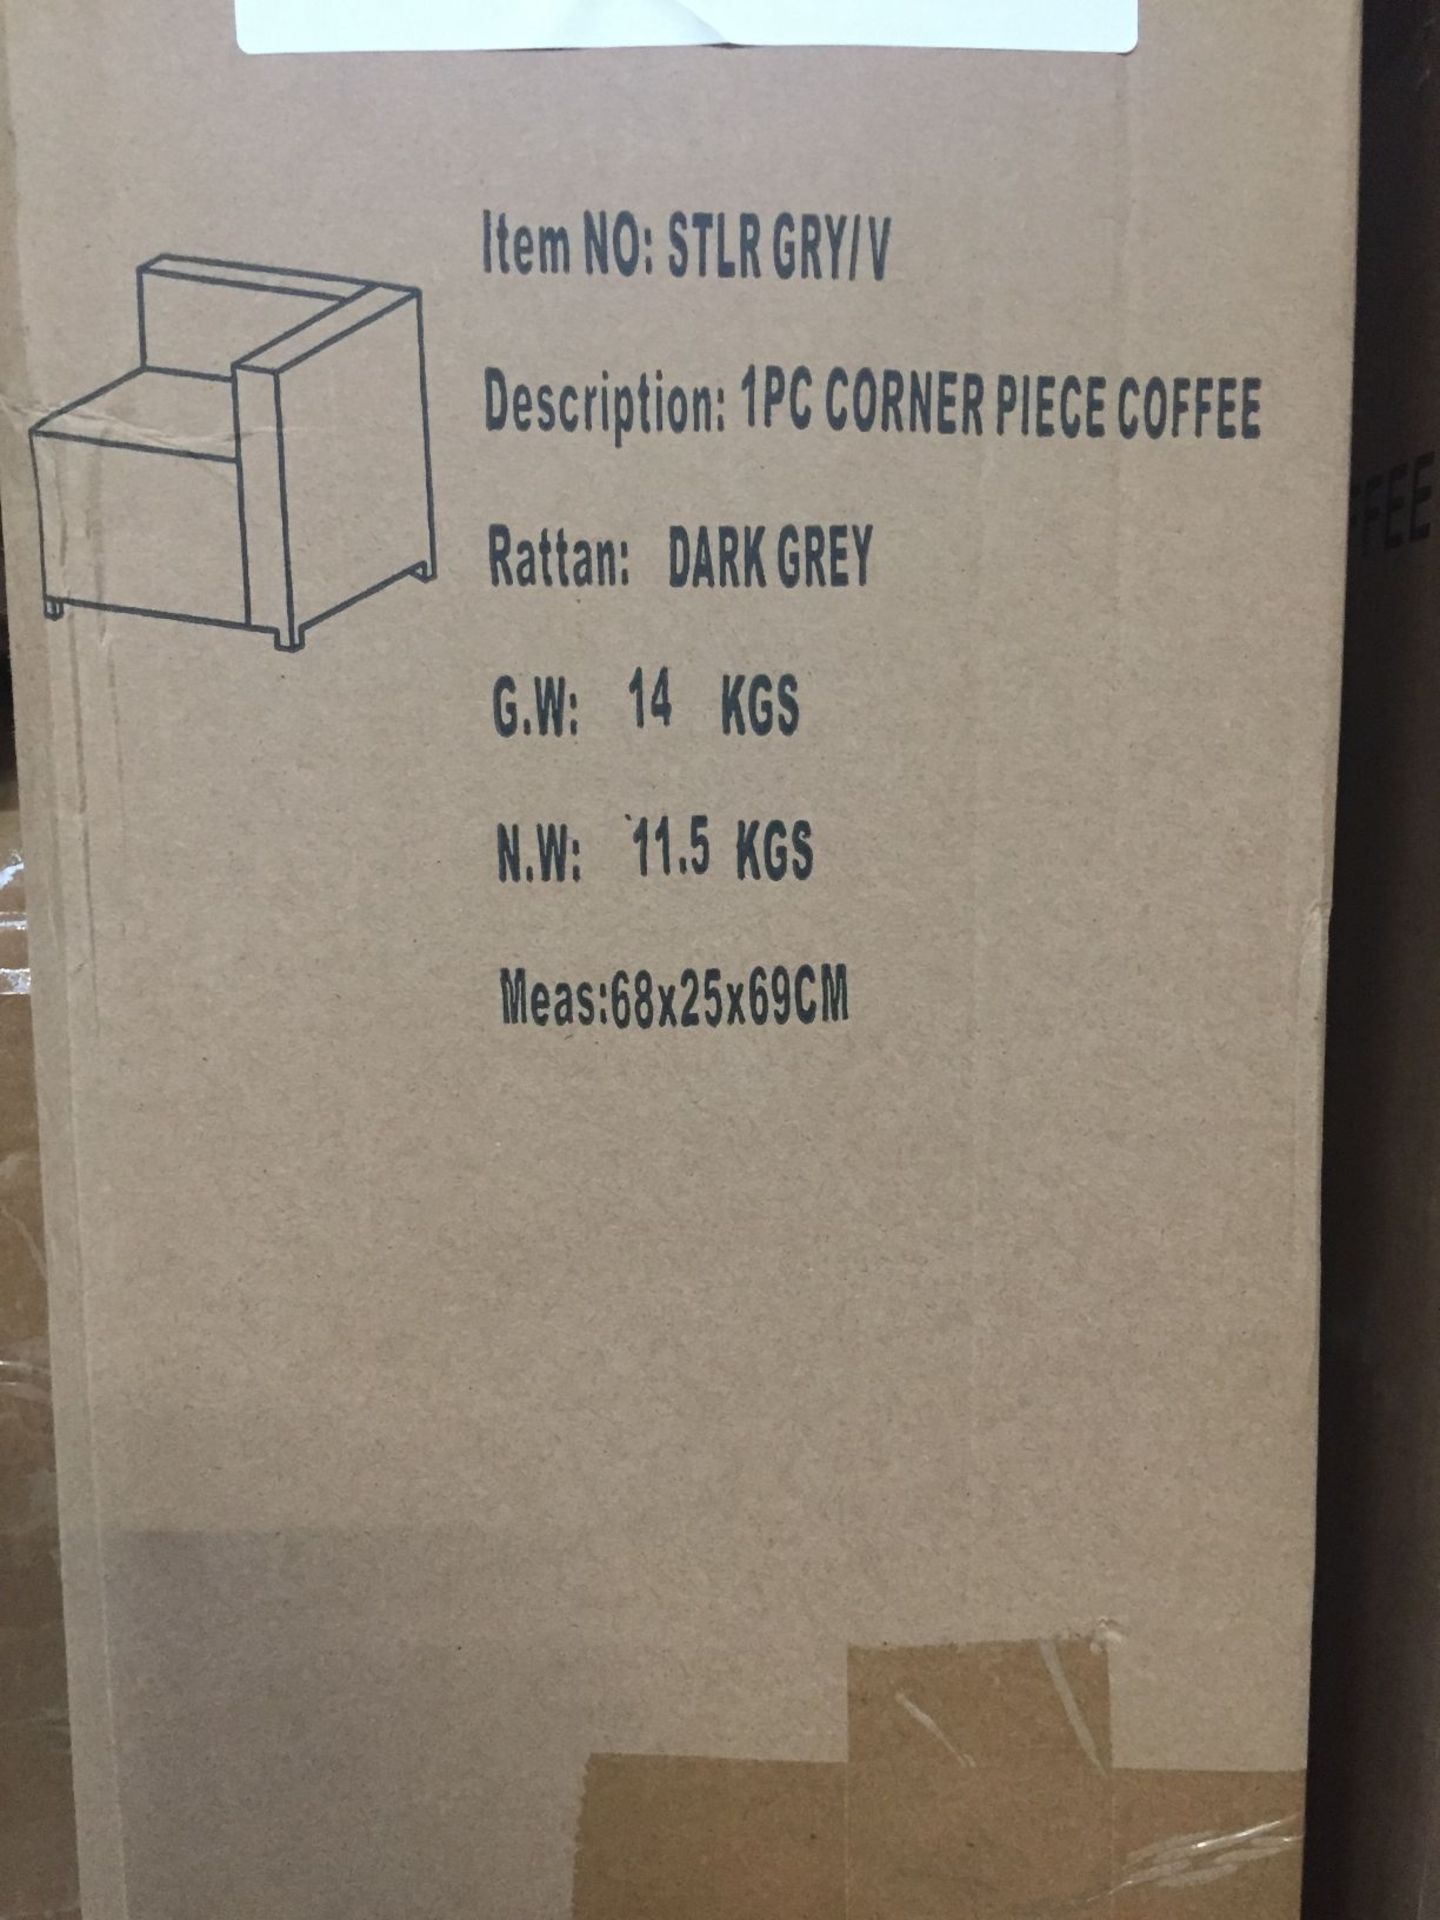 1 LOT TO CONTAIN 1PC CORNER PIECE COFFEE RATTAN IS DARK GREY - BOXED